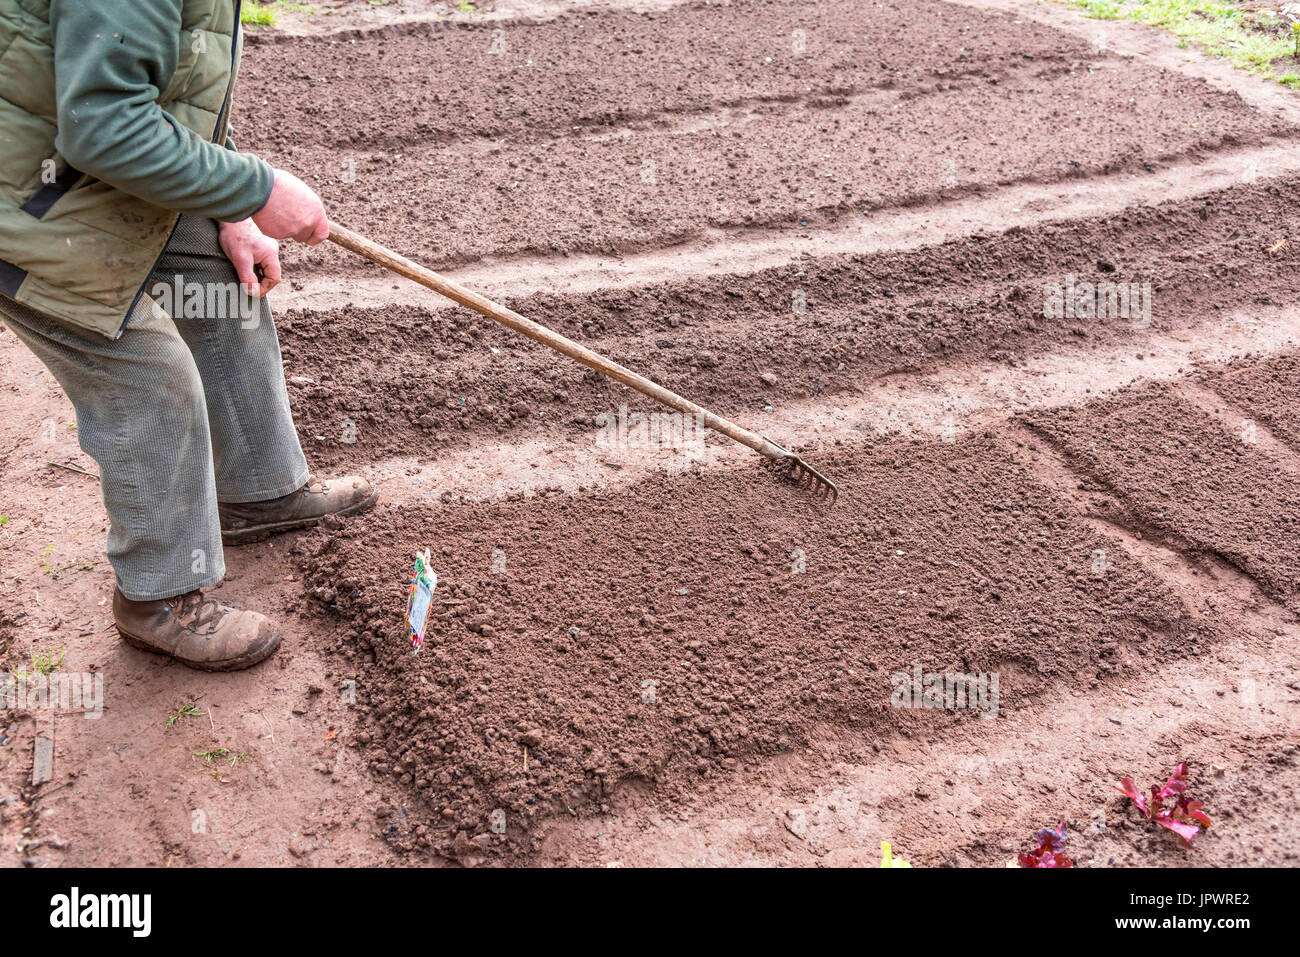 Preparing The Kitchen Garden Soil Before Sowing Stock Photo